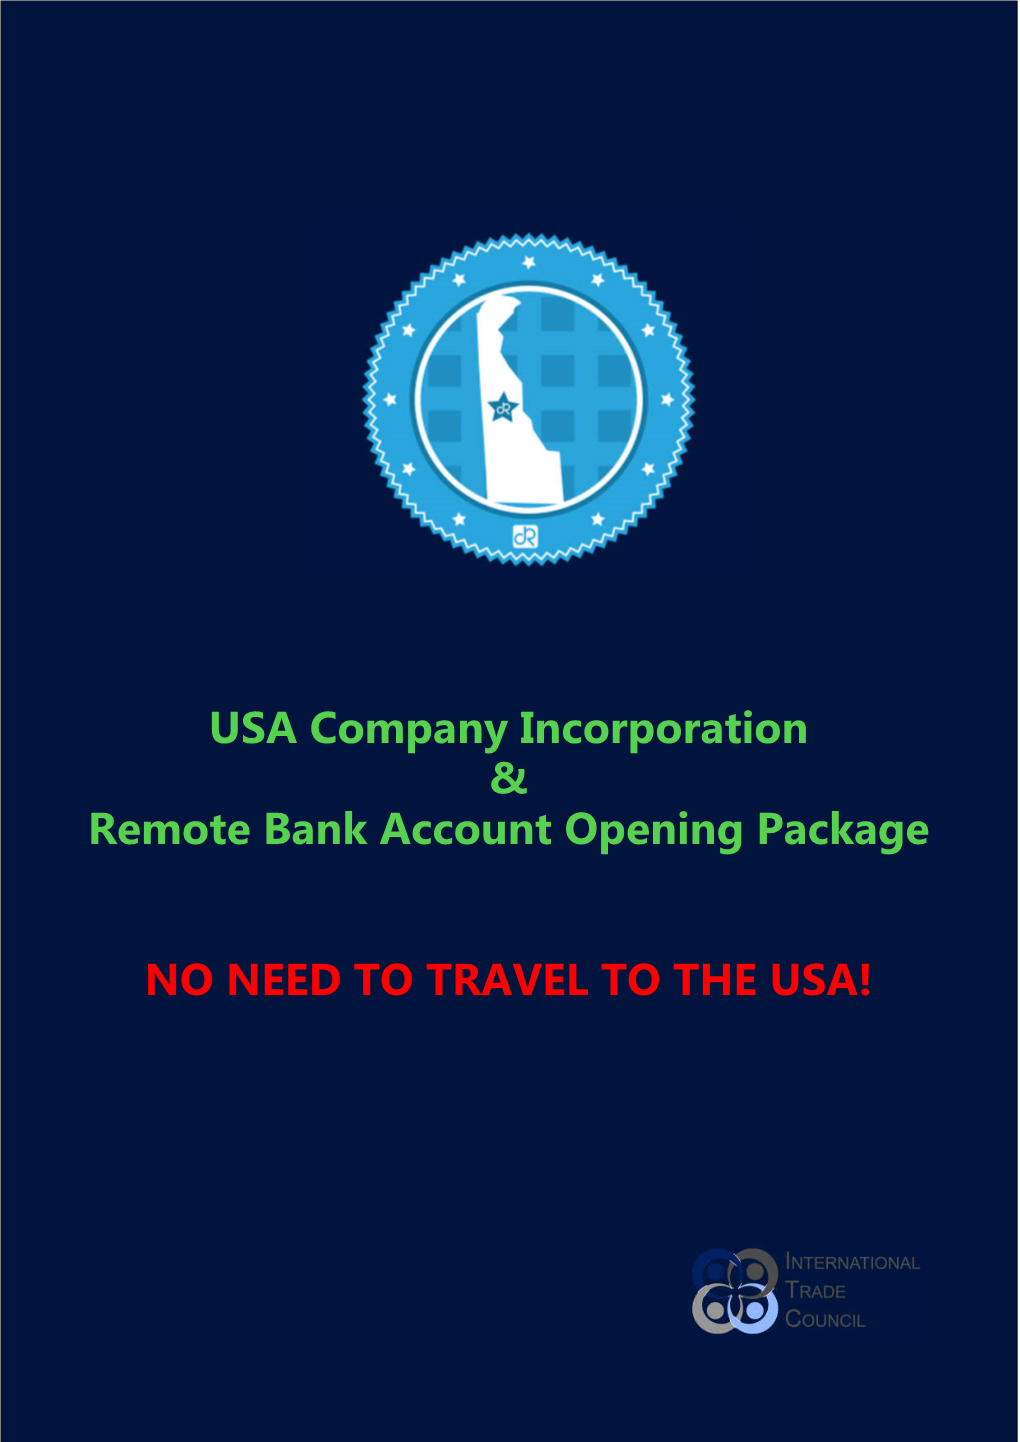 USA Company Incorporation & Remote Bank Account Opening